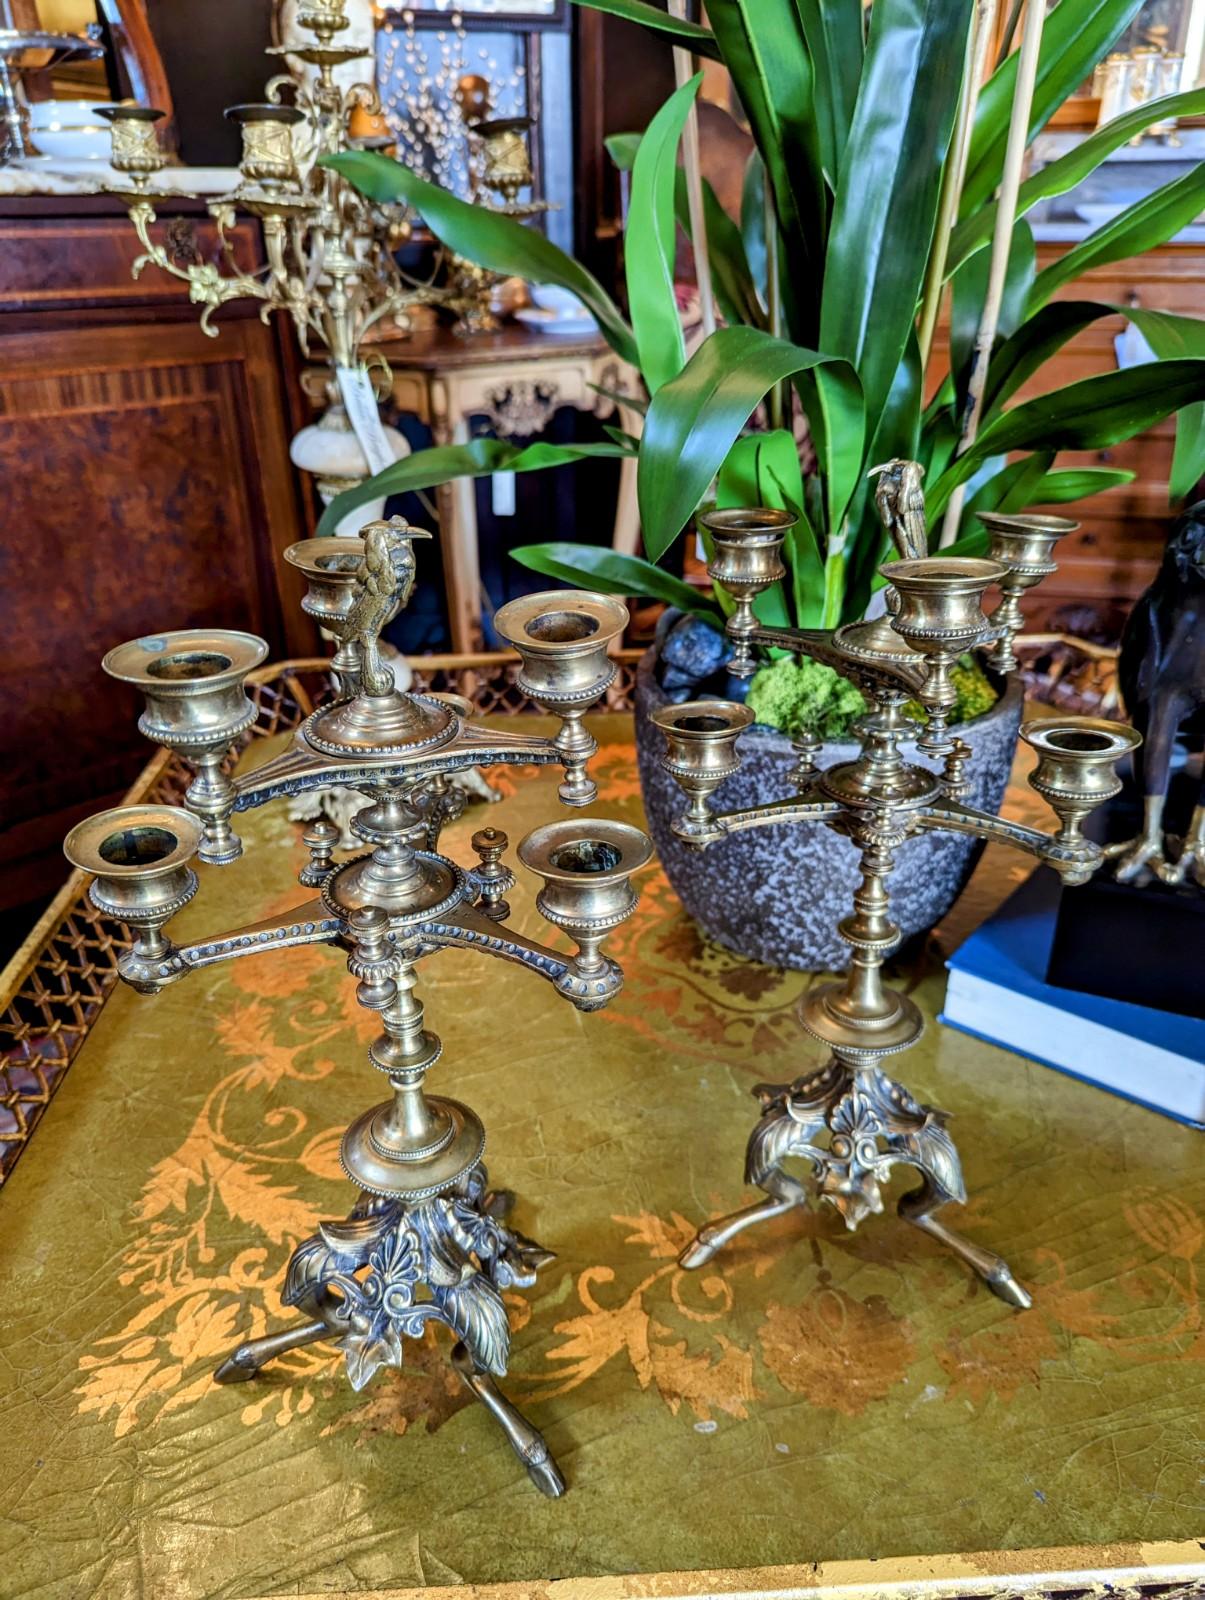 Pair of Antique Candelabras, 19th Century European Brass Candlesticks Footed For Sale 6